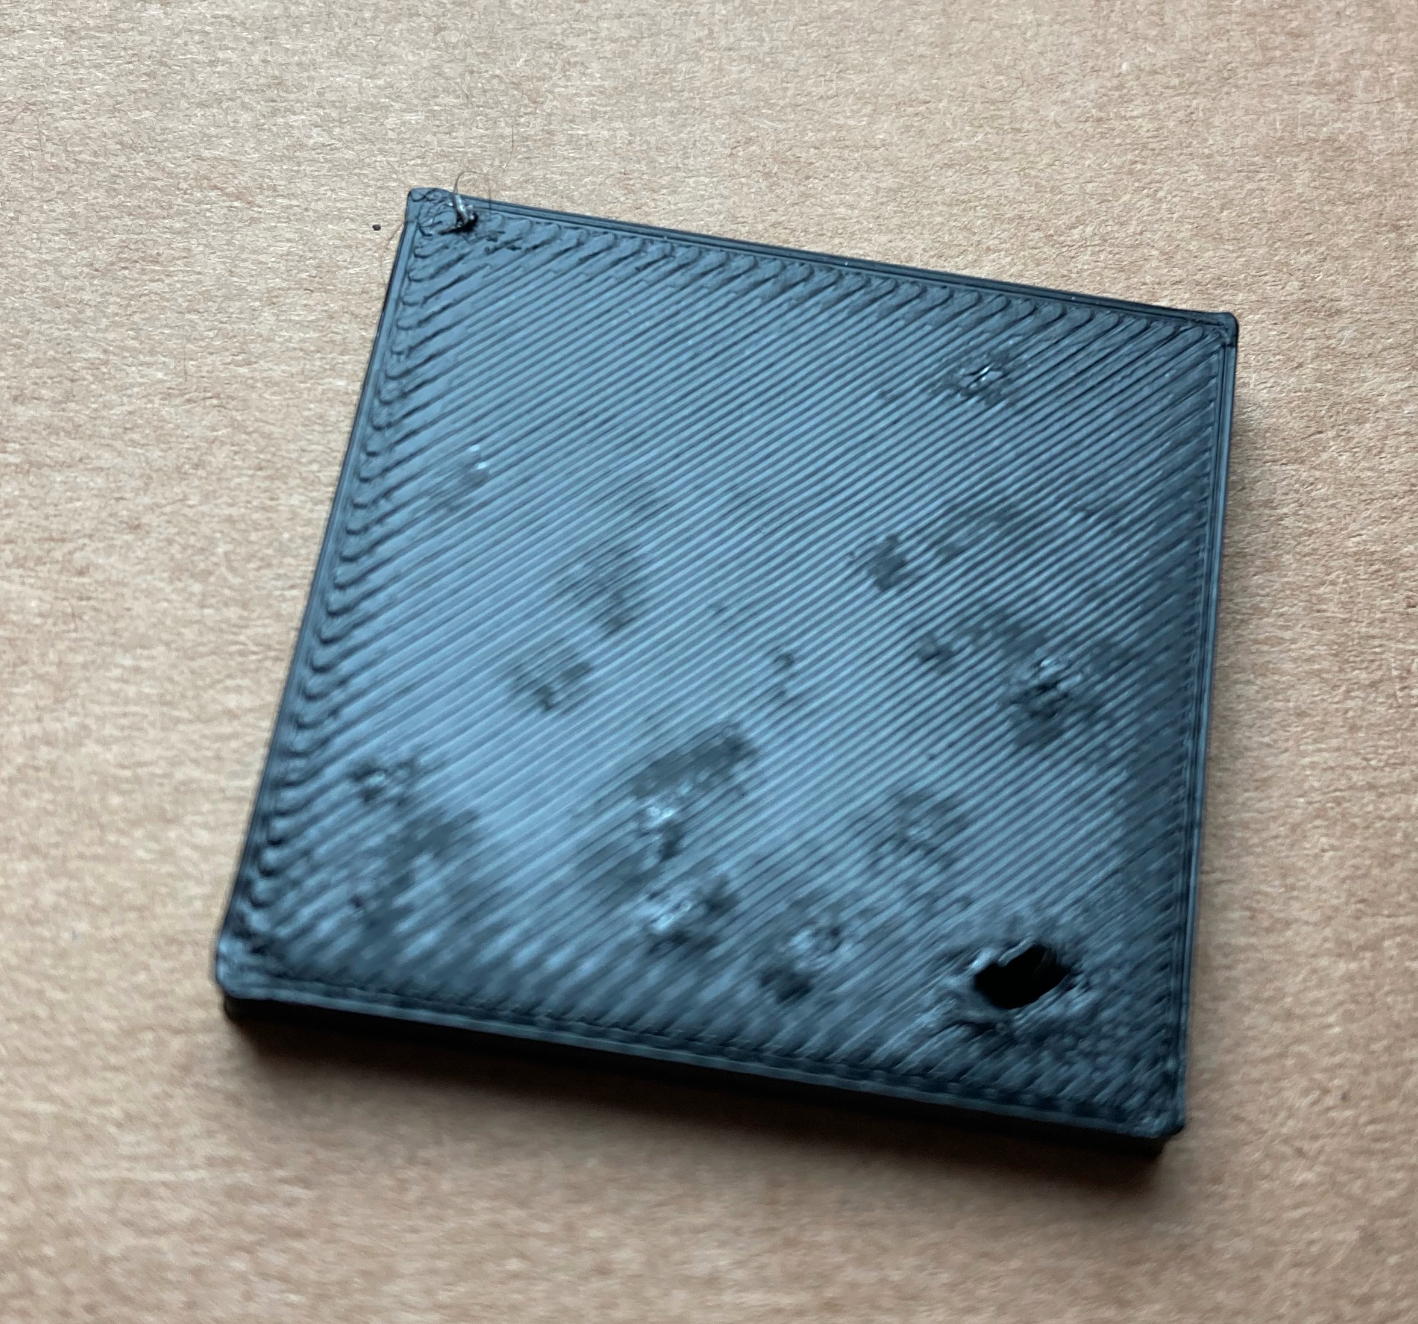 Designstrategies - Troubleshooting: First Layer Fails